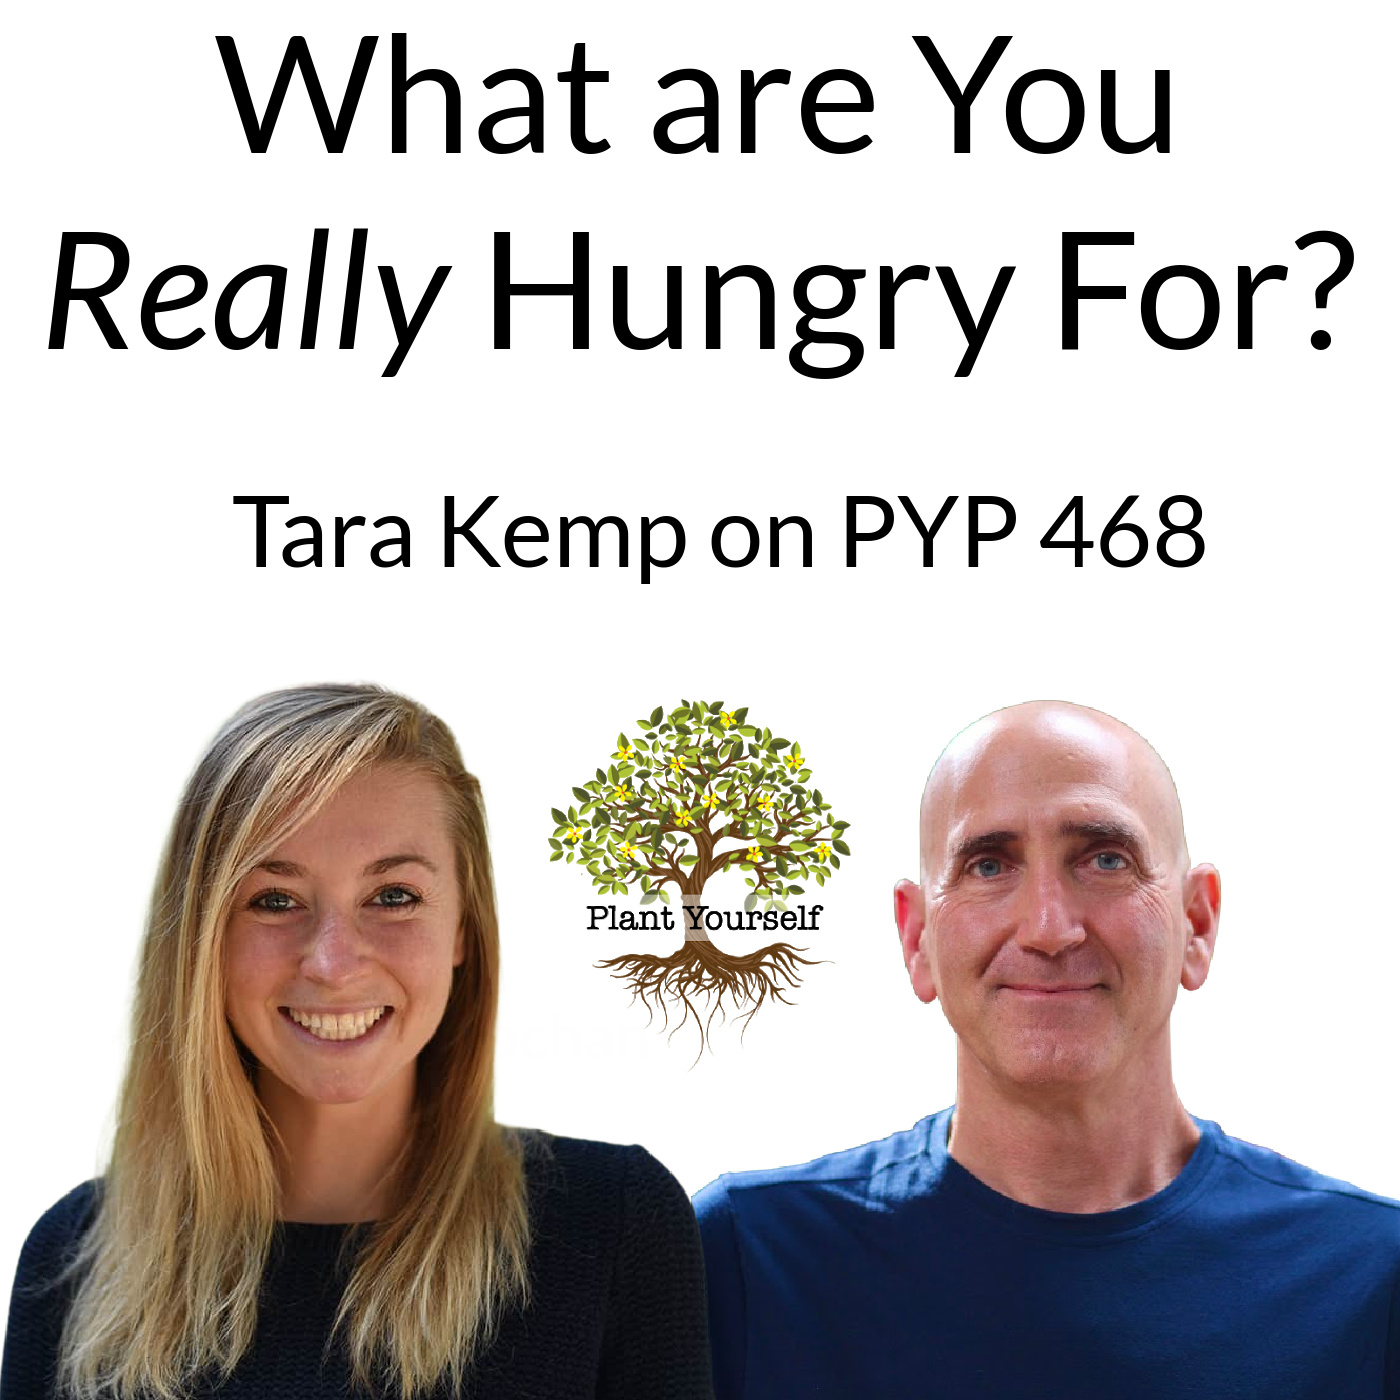 What are You Really Hungry For?: Tara Kemp on PYP 468